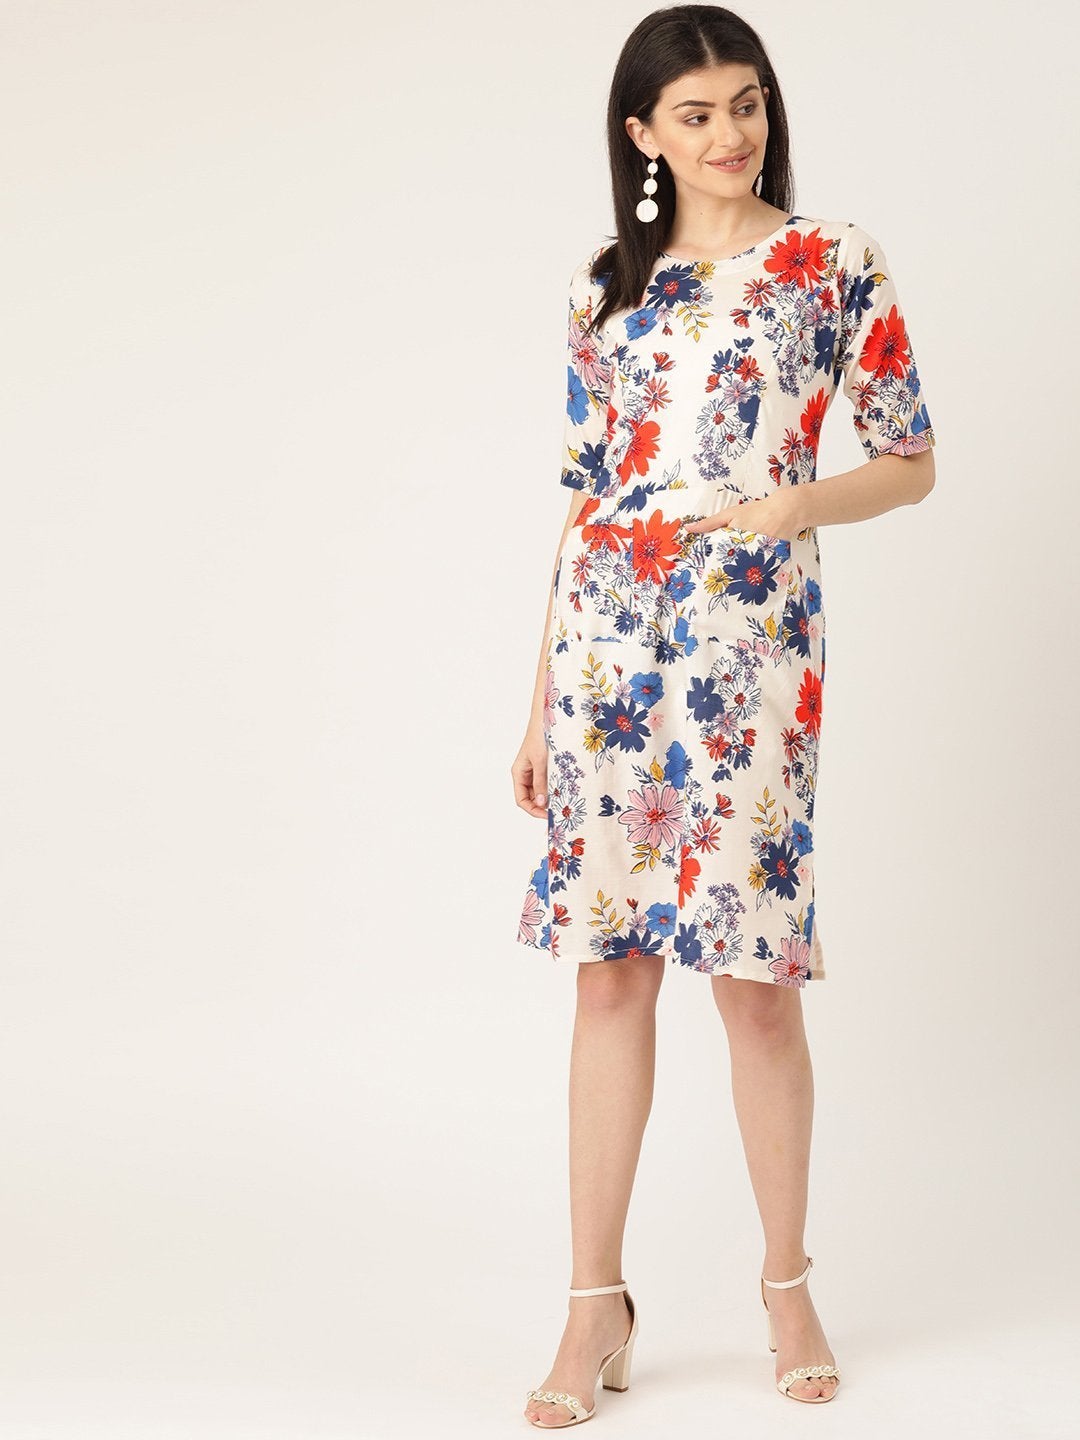 Women's Floral Printed Dress With Pockets - InWeave